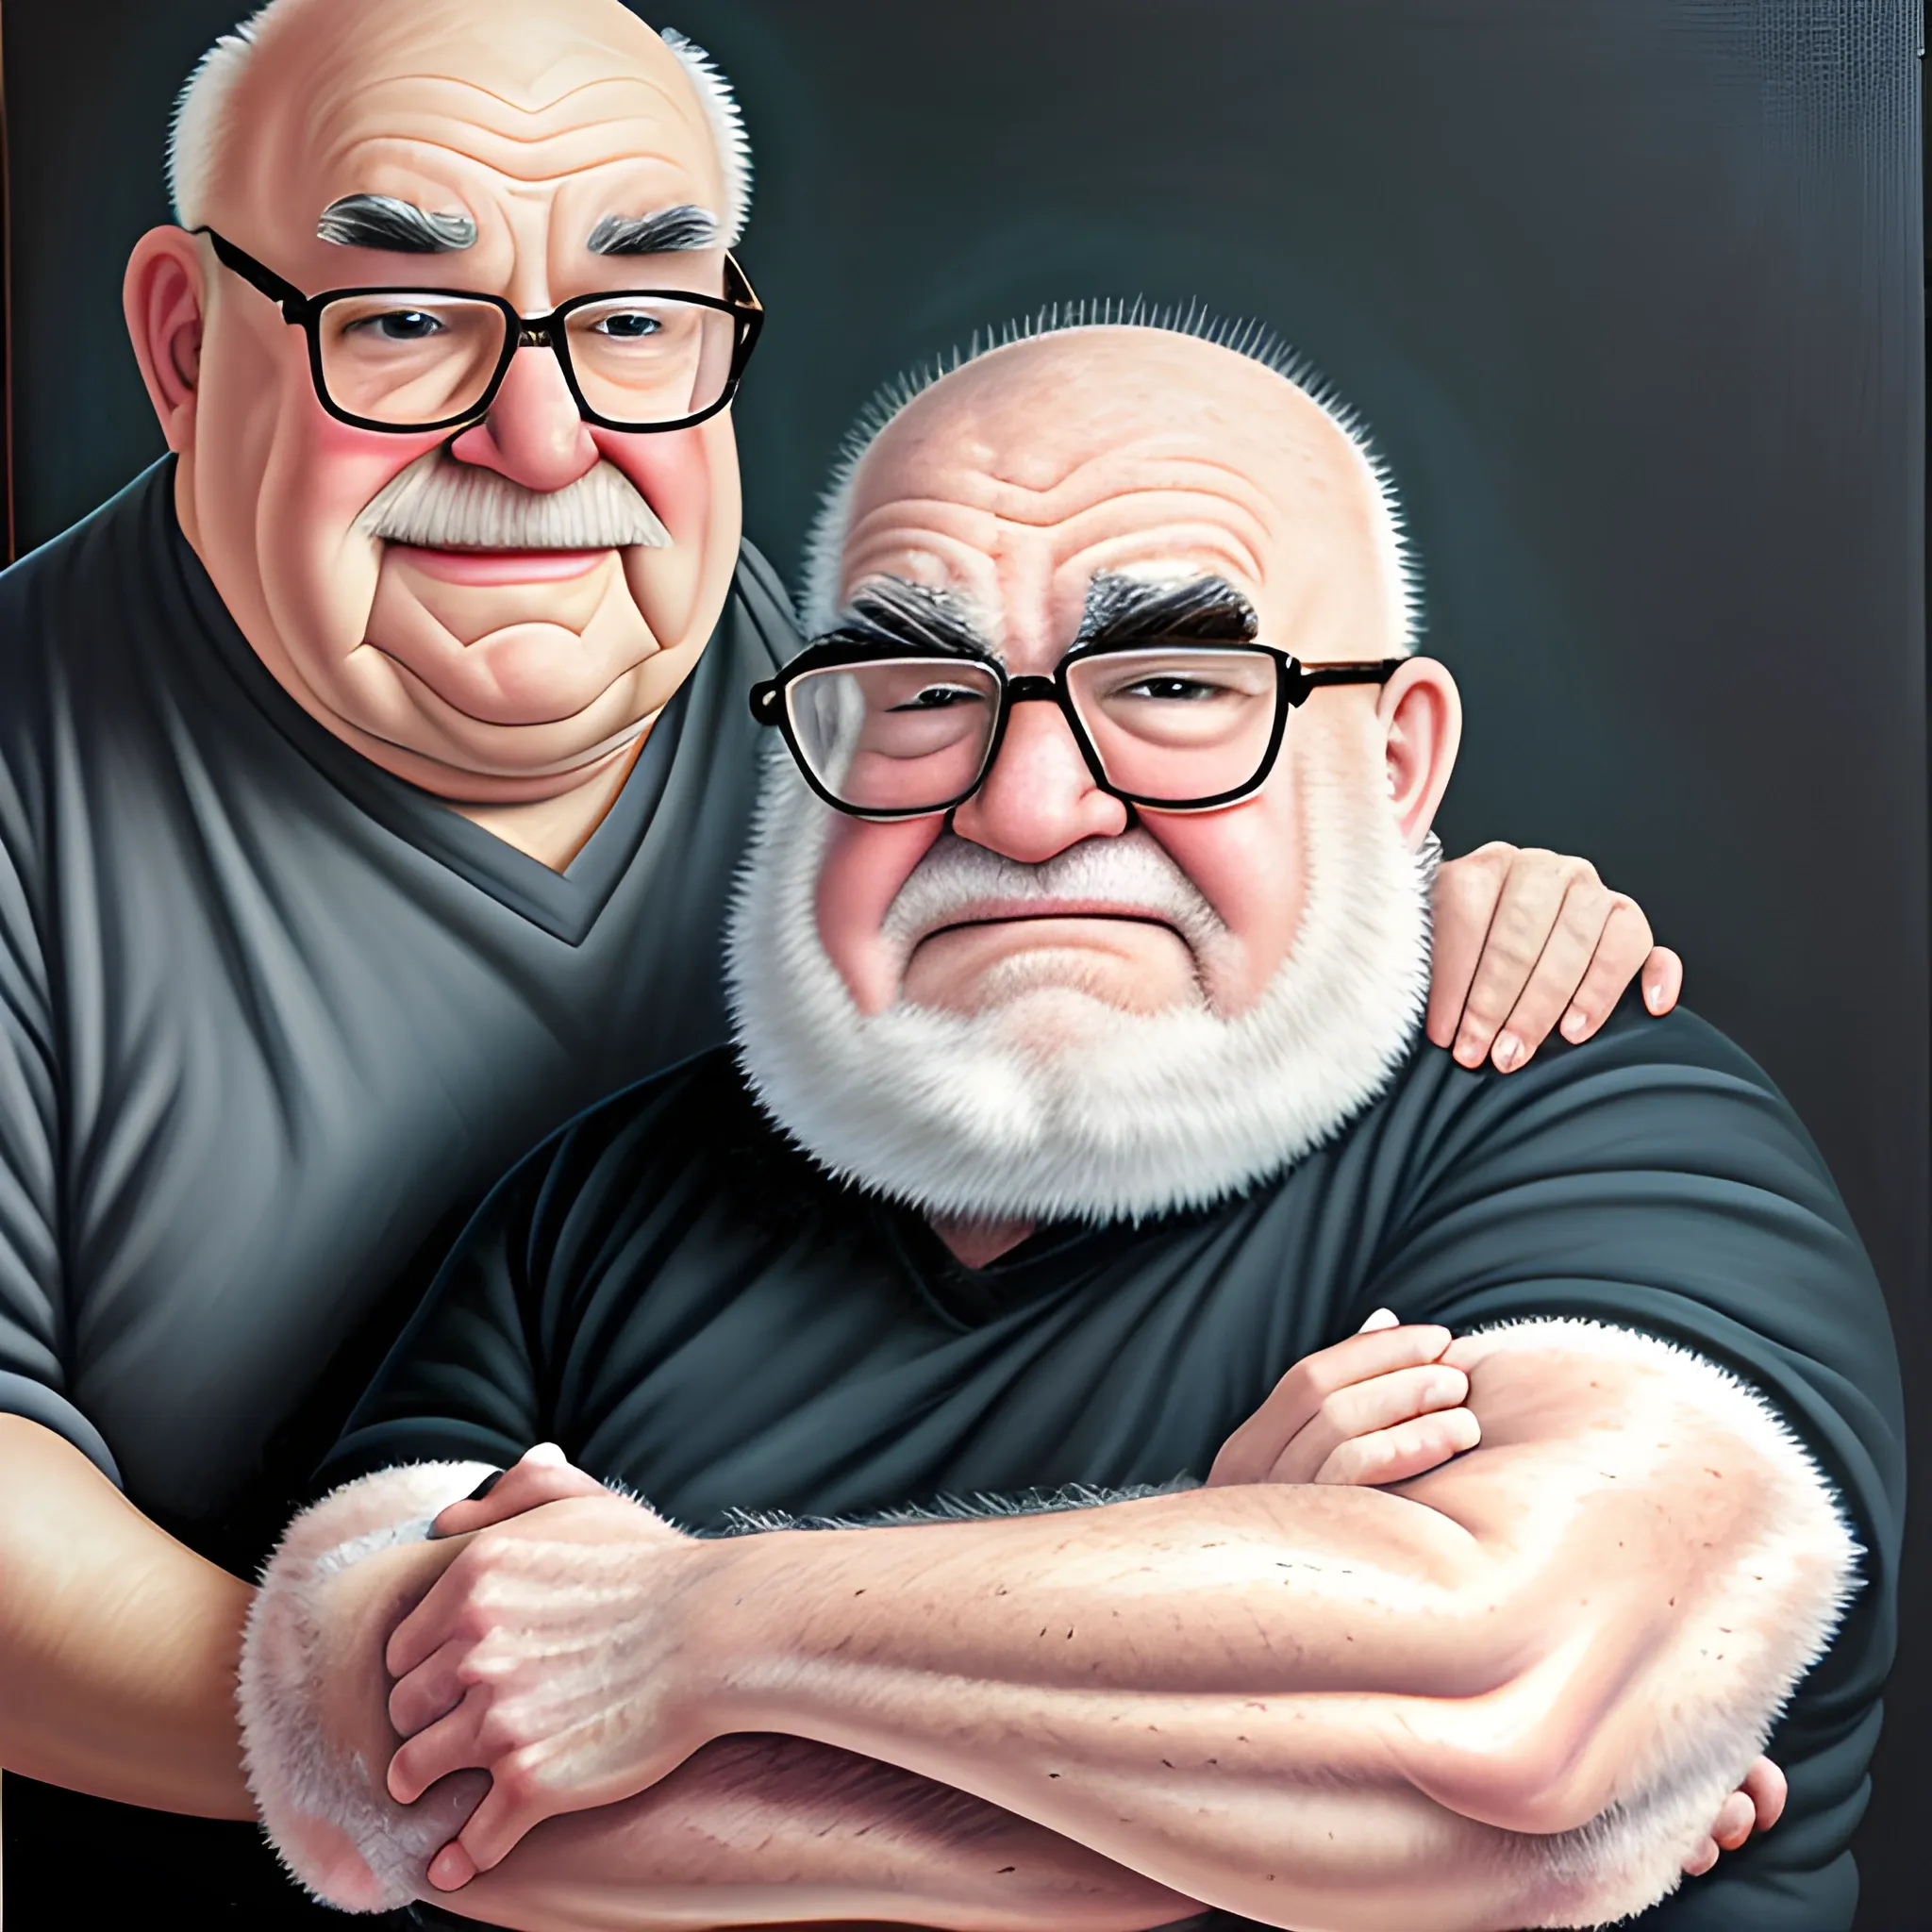 Fat grandpa, very hairy arms, bald, glasses, Ed Asner look alike, Oil Painting